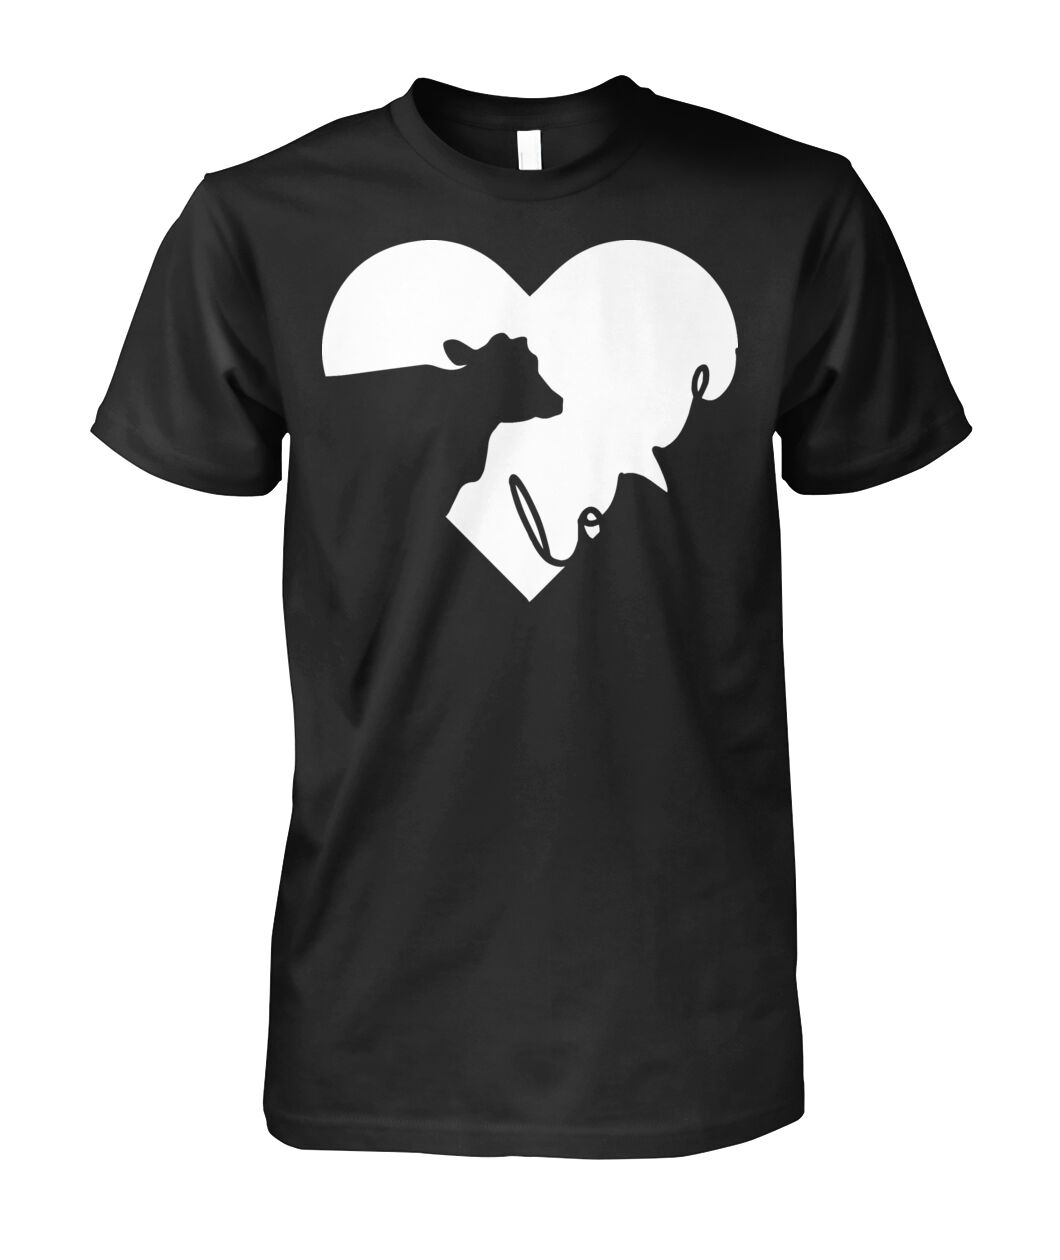 Love cows - Men's and Women's t-shirt , Vneck, Hoodies - myfunfarm - clothing acceessories shoes for cow lovers, pig, horse, cat, sheep, dog, chicken, goat farmer